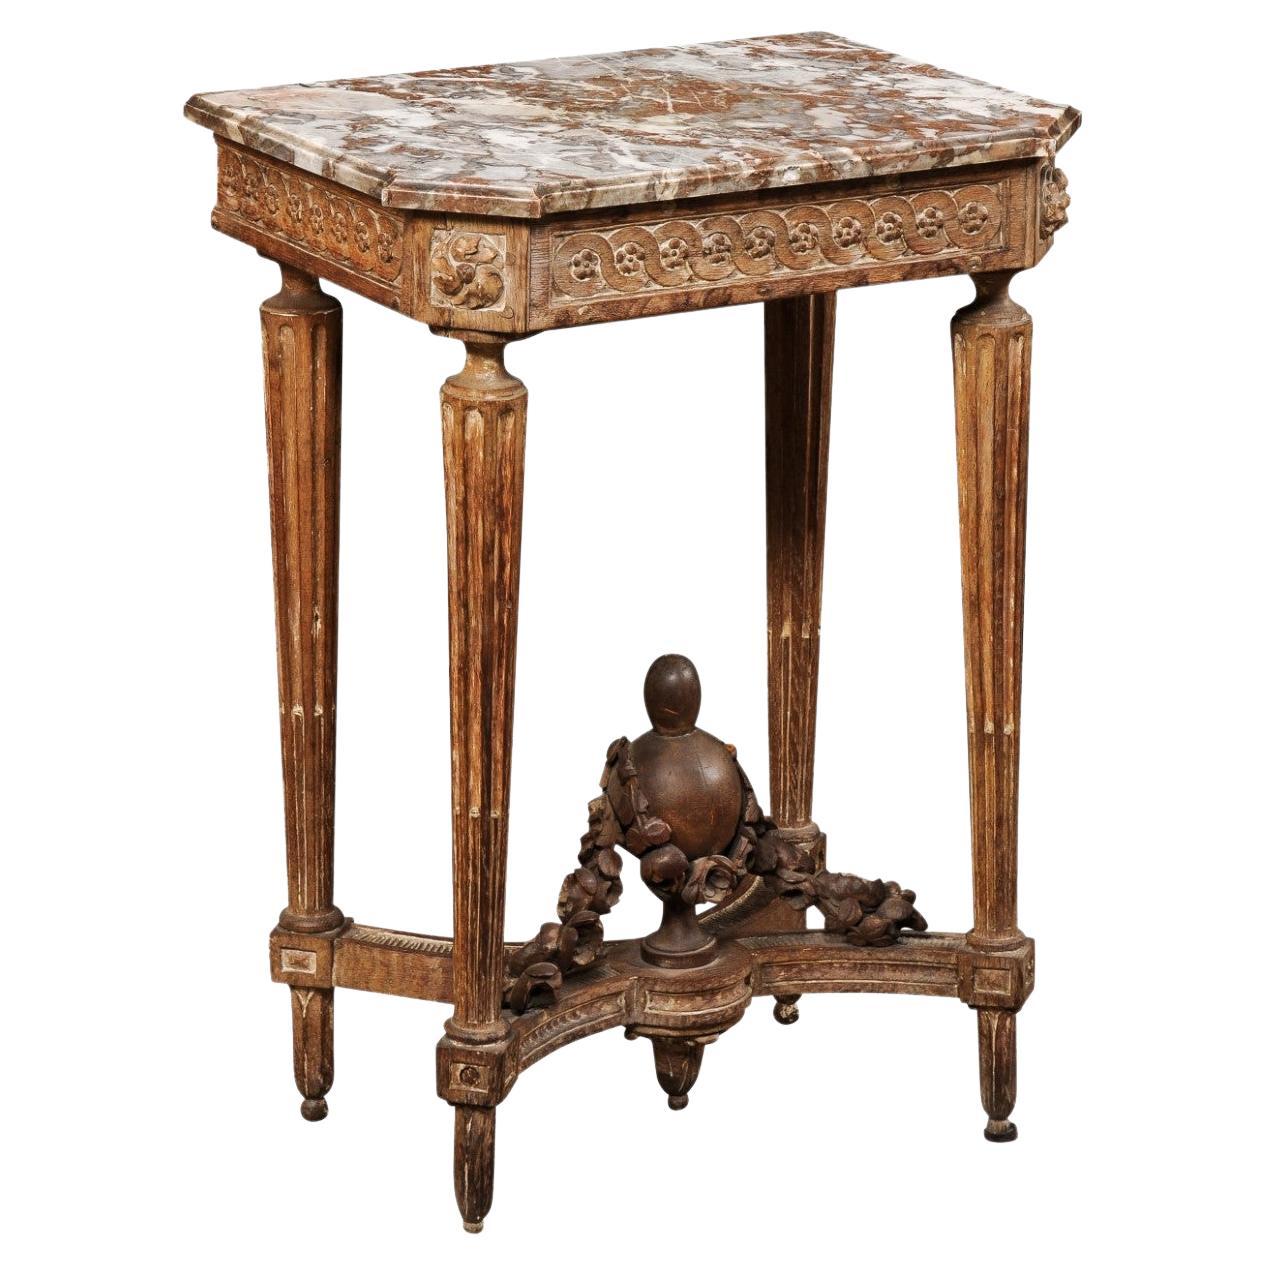 French Antique Beautifully-Carved Petite Marble-Top Table w/ Interesting History For Sale